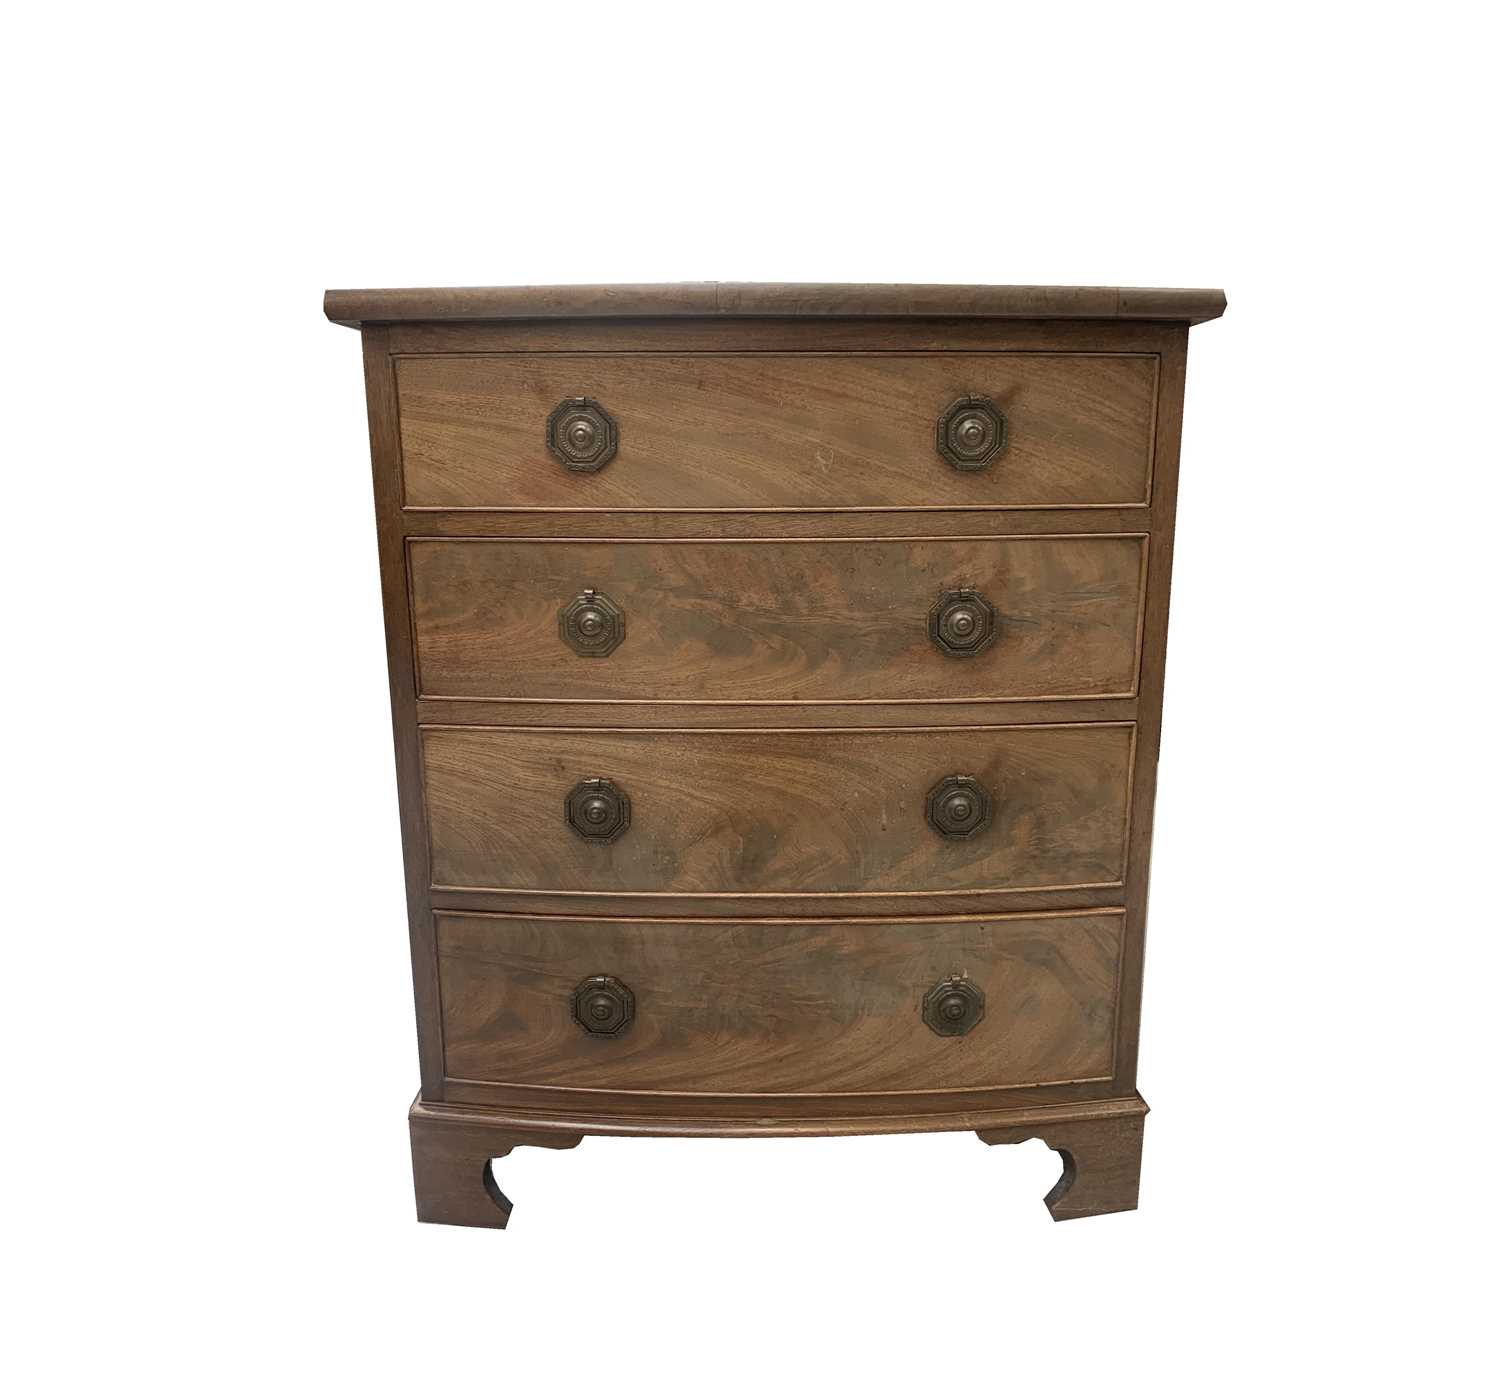 A Georgian style mahogany small bow front chest, circa 1900, fitted four long drawers, on bracket